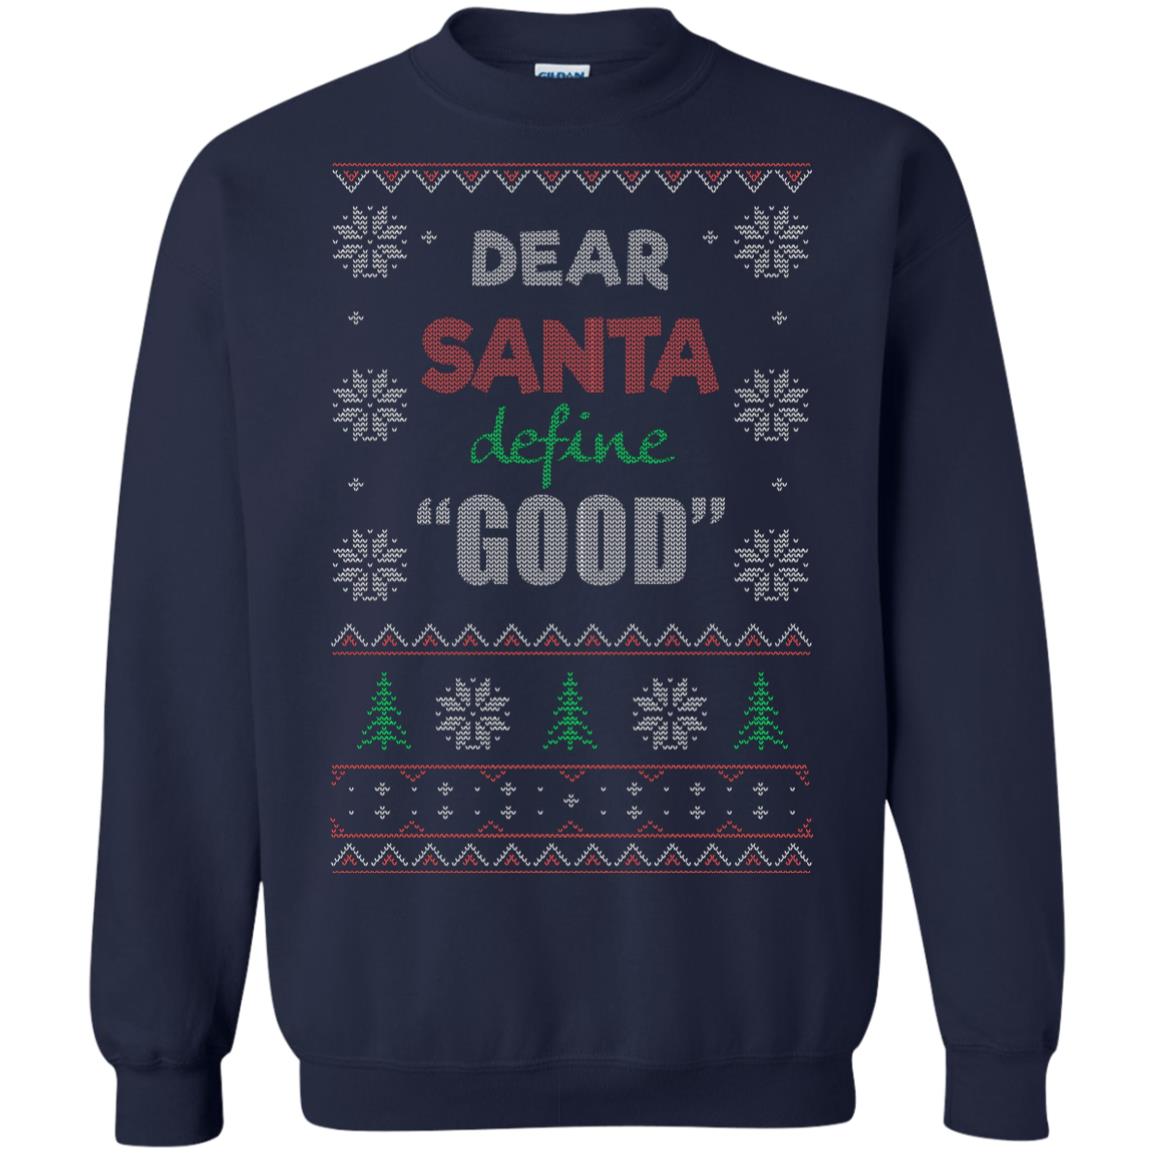 Christmas Ugly Sweater Dear Santa funny Gifts Hoodies sweaters - GoneBold.gift